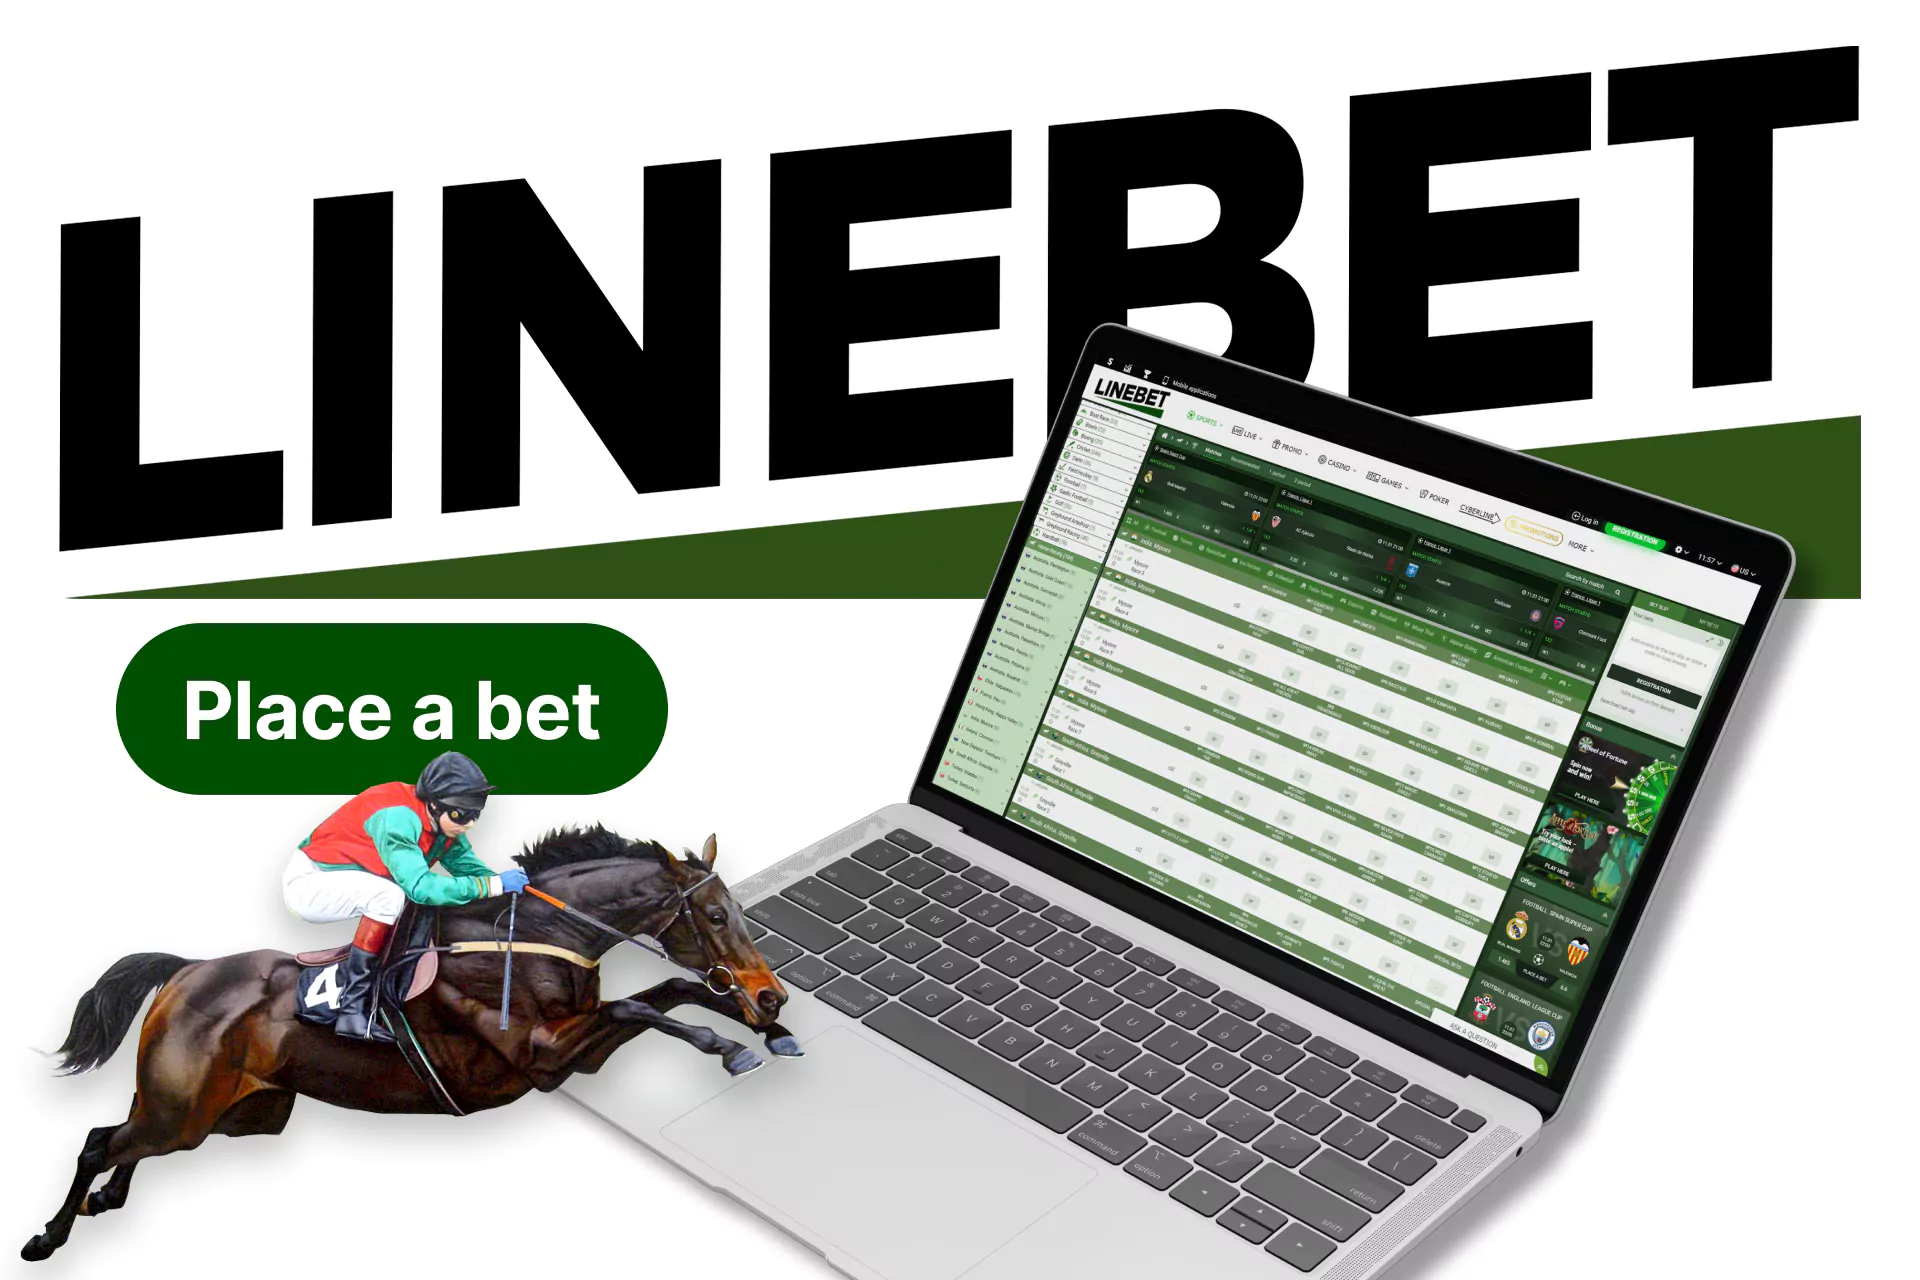 Learn more about the various horse racing betting options in Linebet.